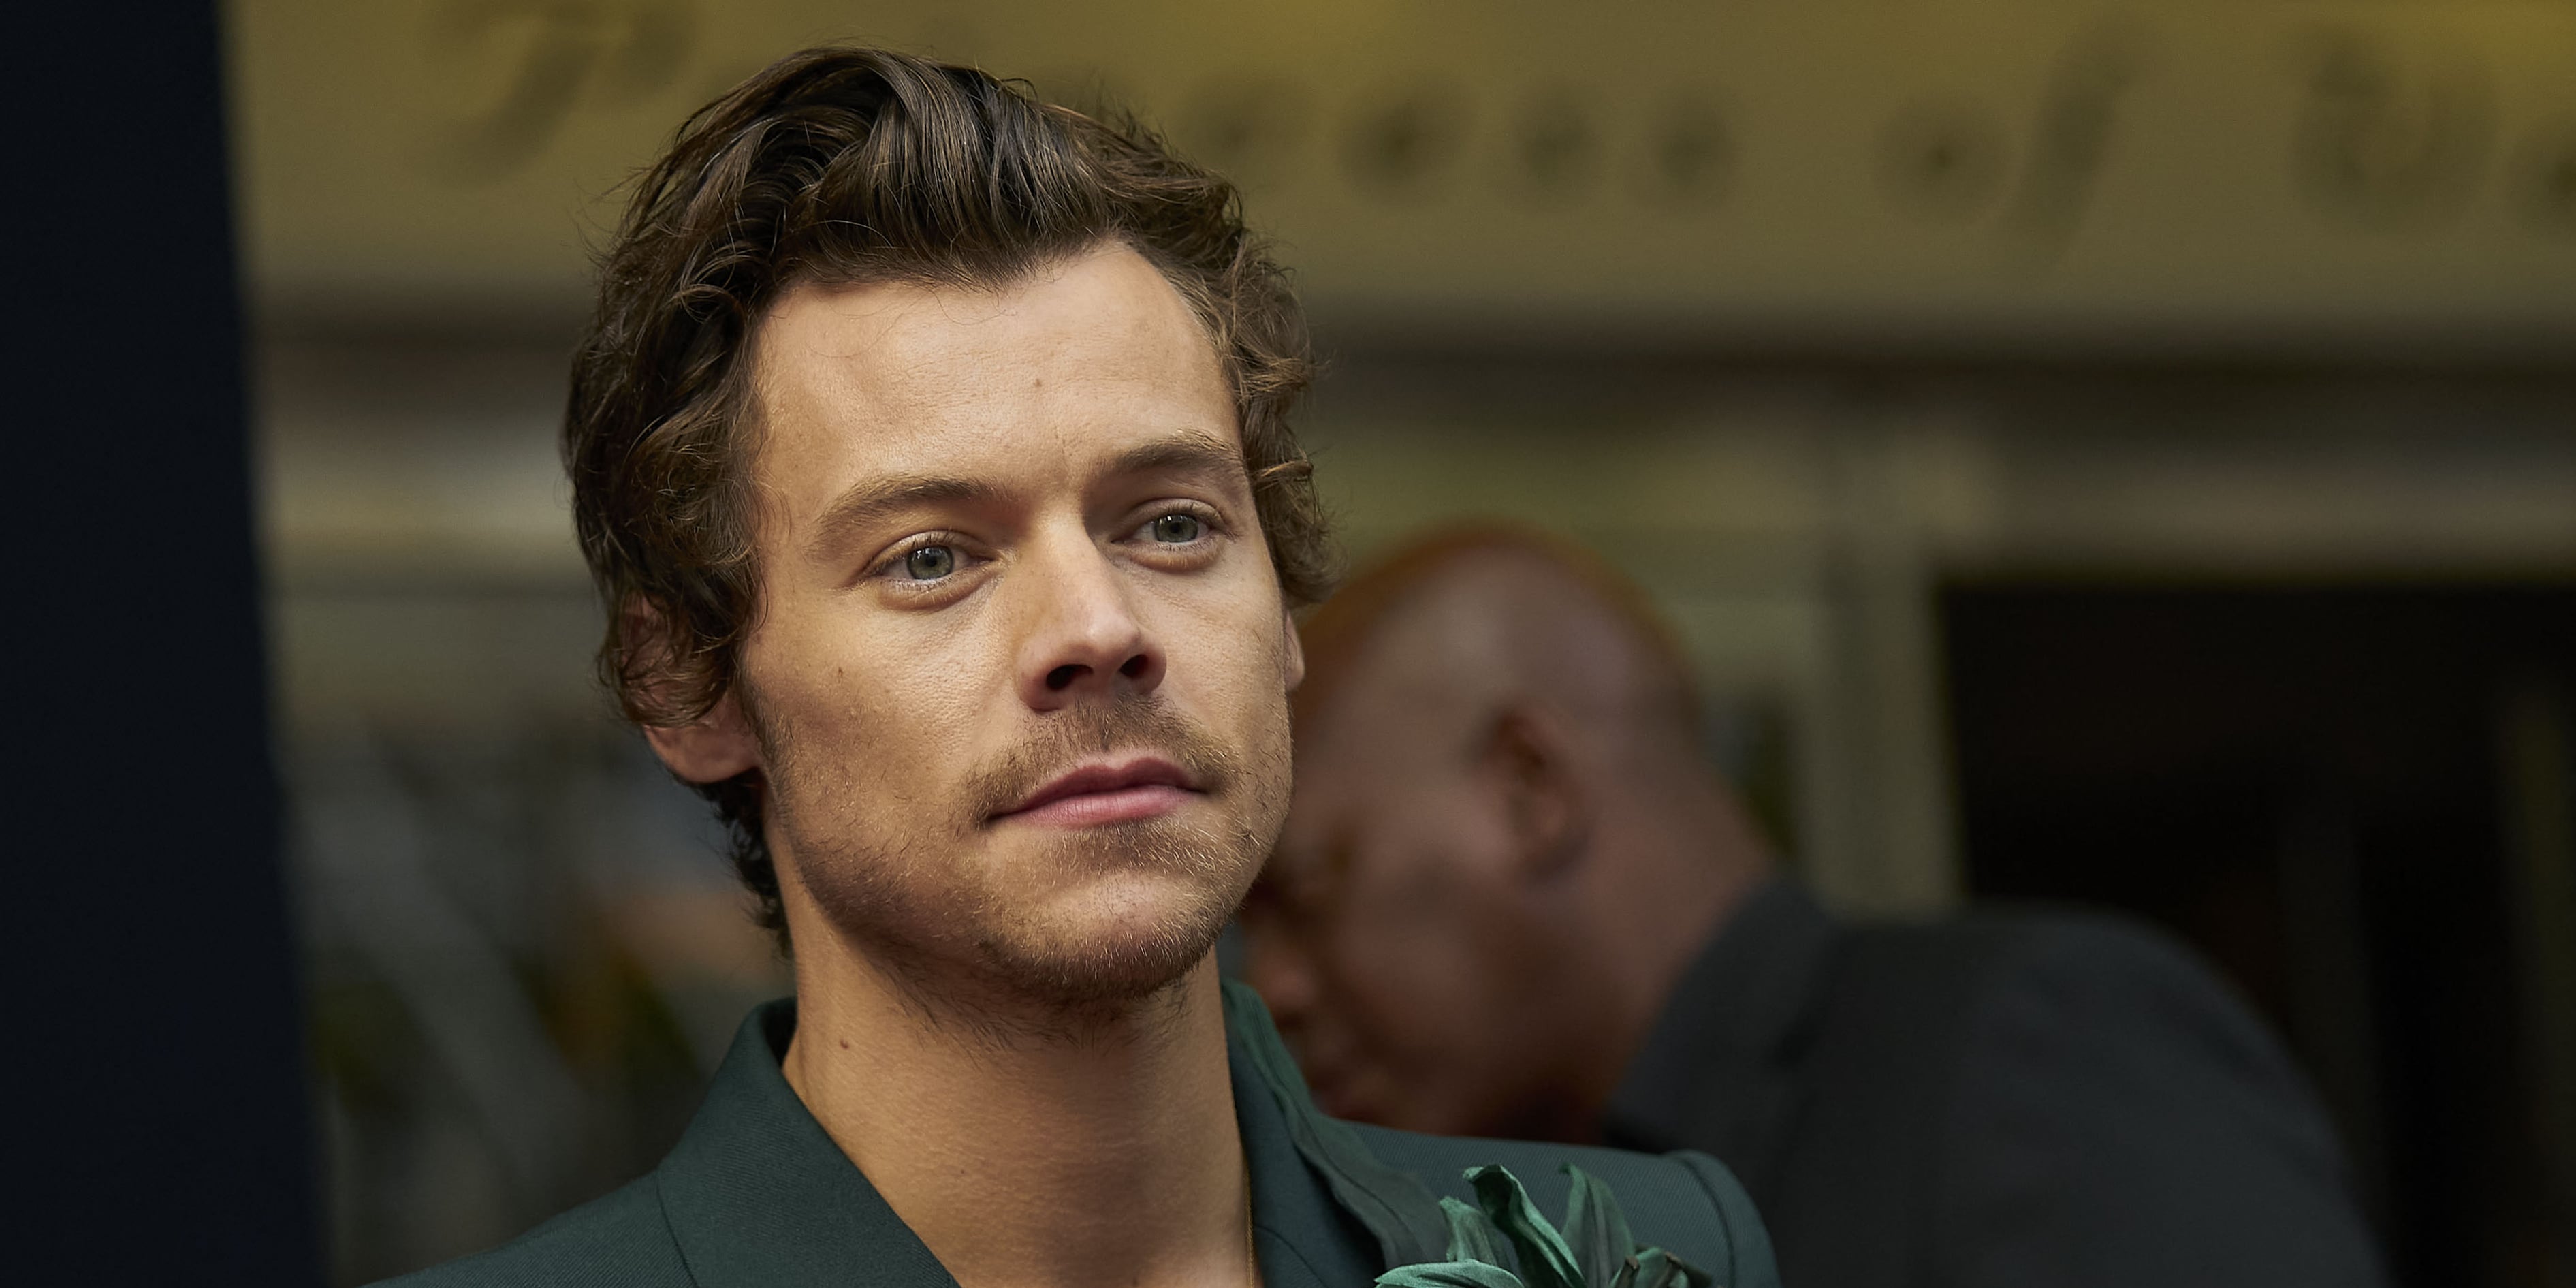 Harry Styles' girlfriend Olivia Wilde served custody papers from ex-fiance  while on stage